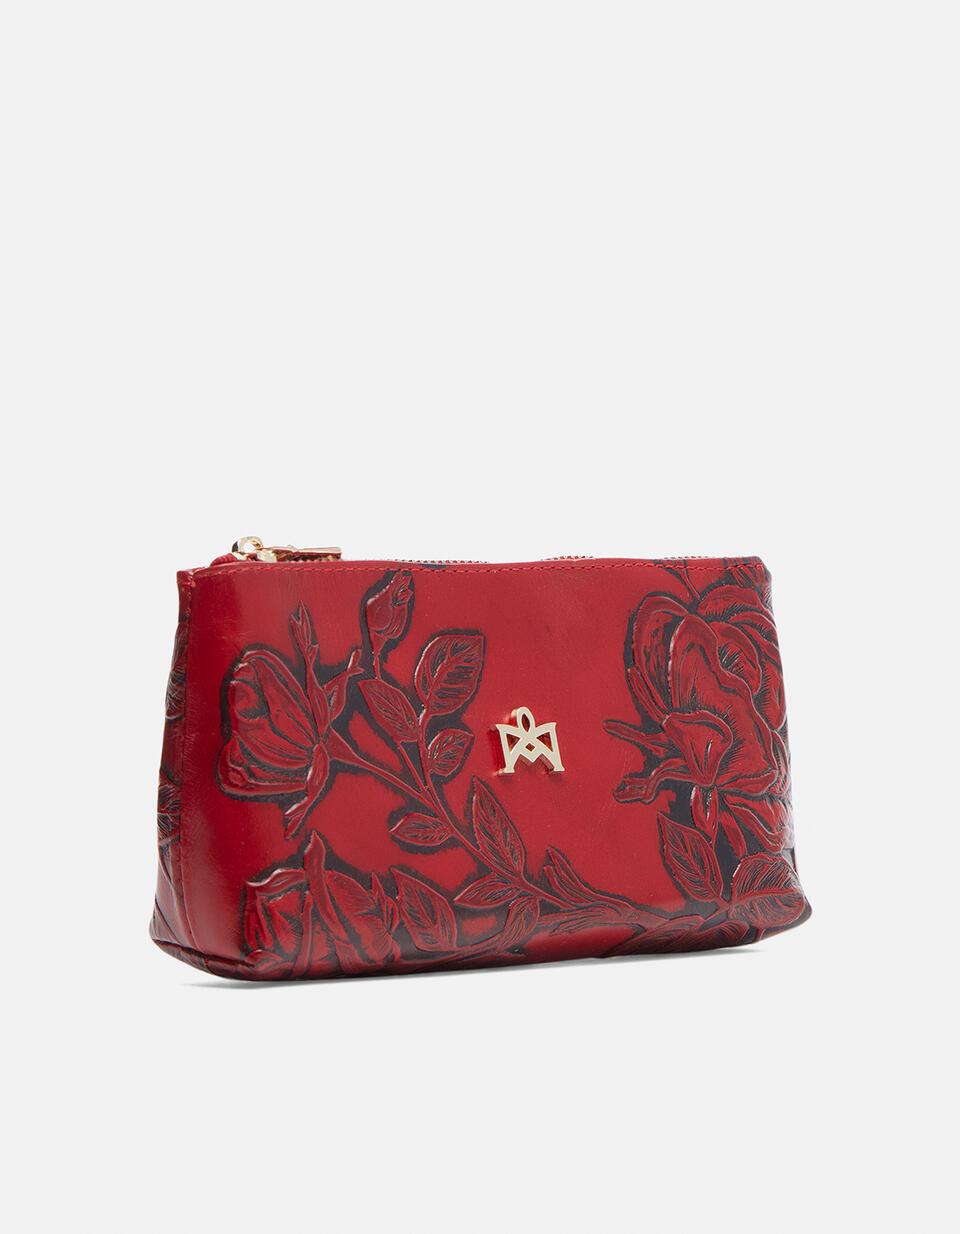 Key pouch Red  - Key Holders - Women's Accessories - Accessories - Cuoieria Fiorentina